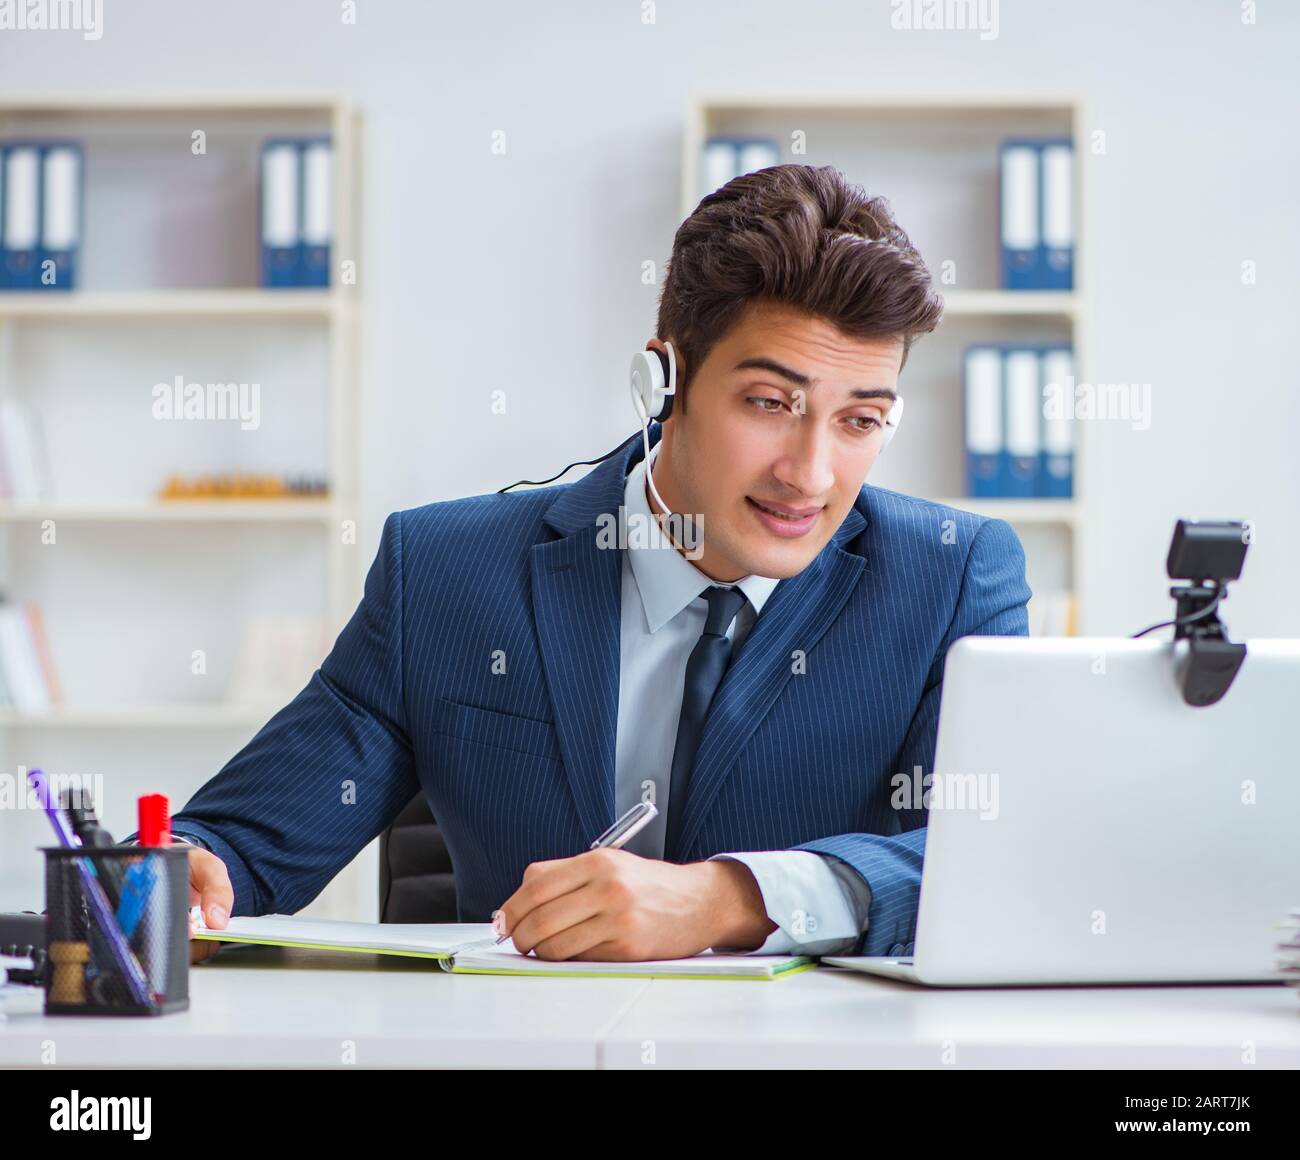 The Young Help Desk Operator Working In Office Stock Photo